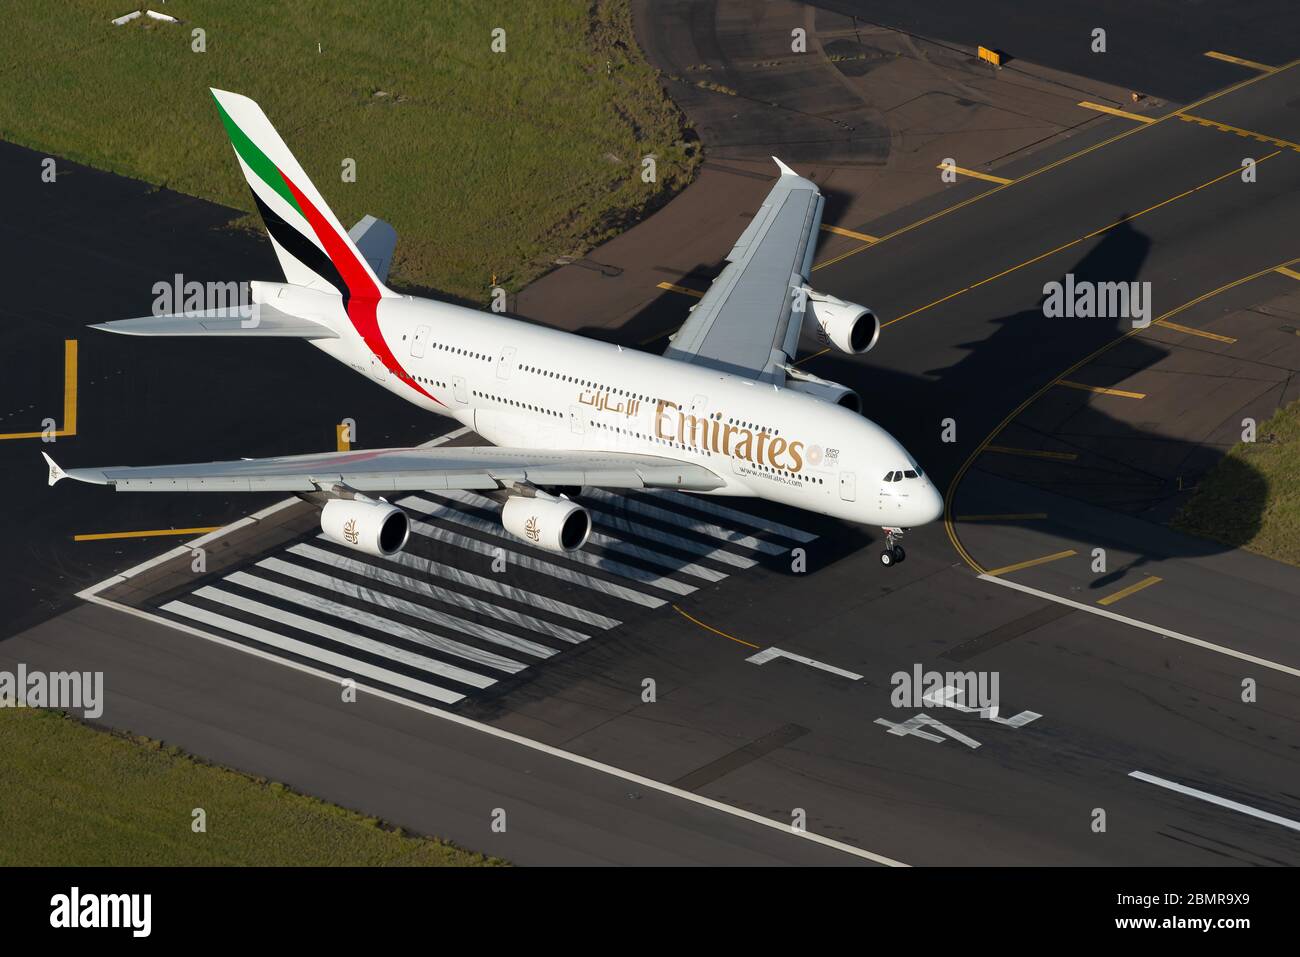 Emirates Airlines Airbus A380 aircraft over Sydney International Airport runway threshold before landing. Aerial view of huge A380 airplane. Stock Photo